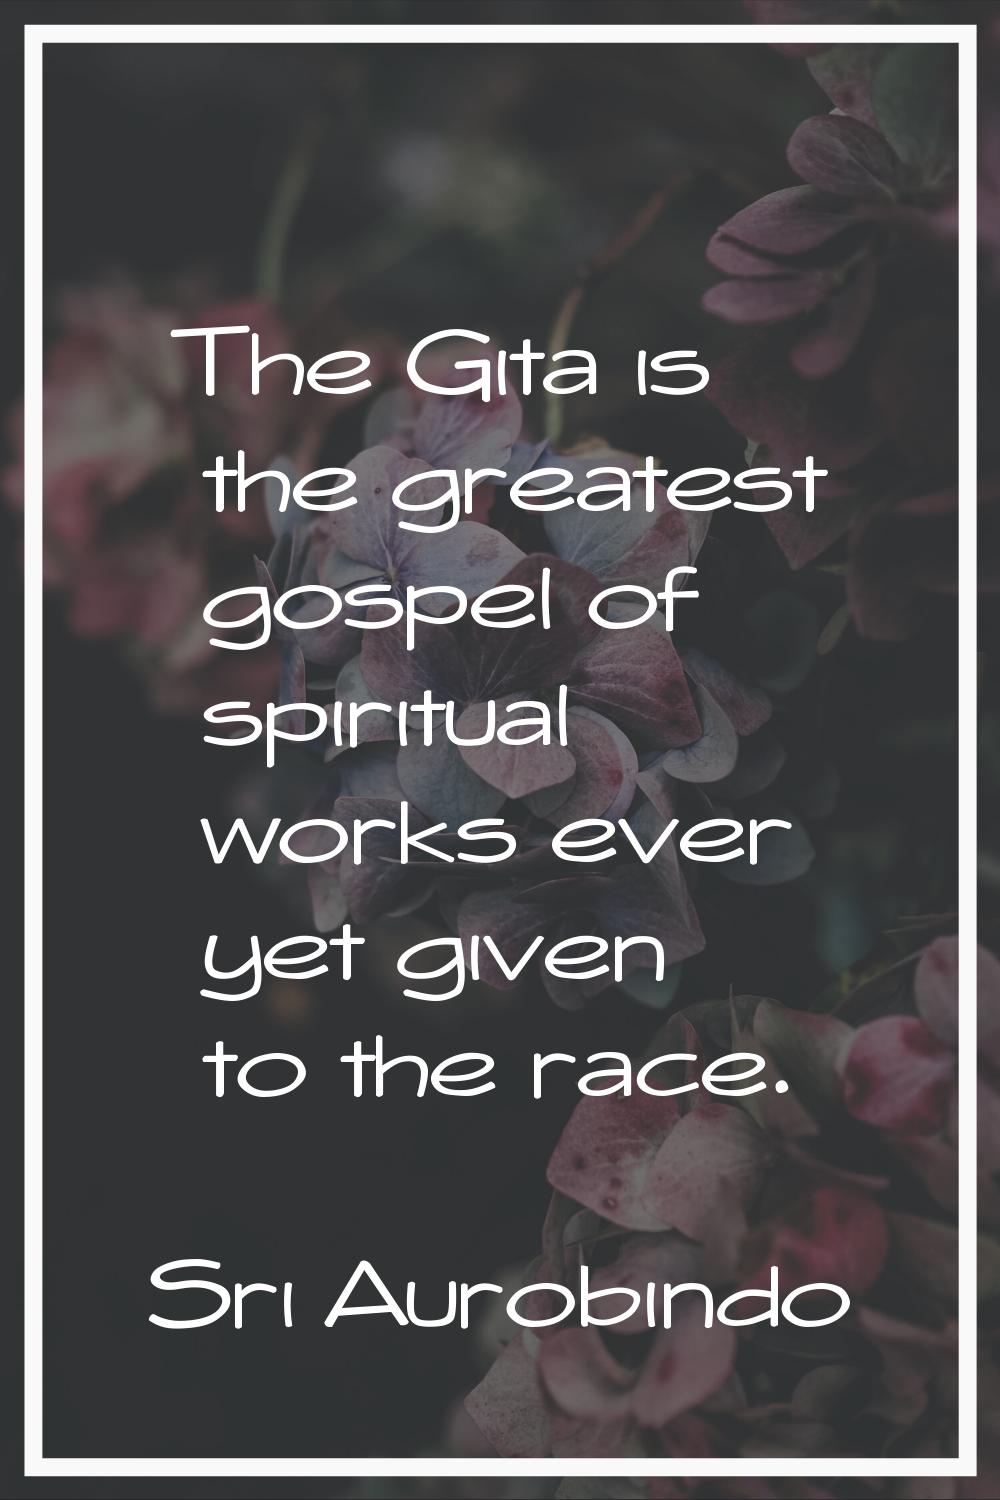 The Gita is the greatest gospel of spiritual works ever yet given to the race.